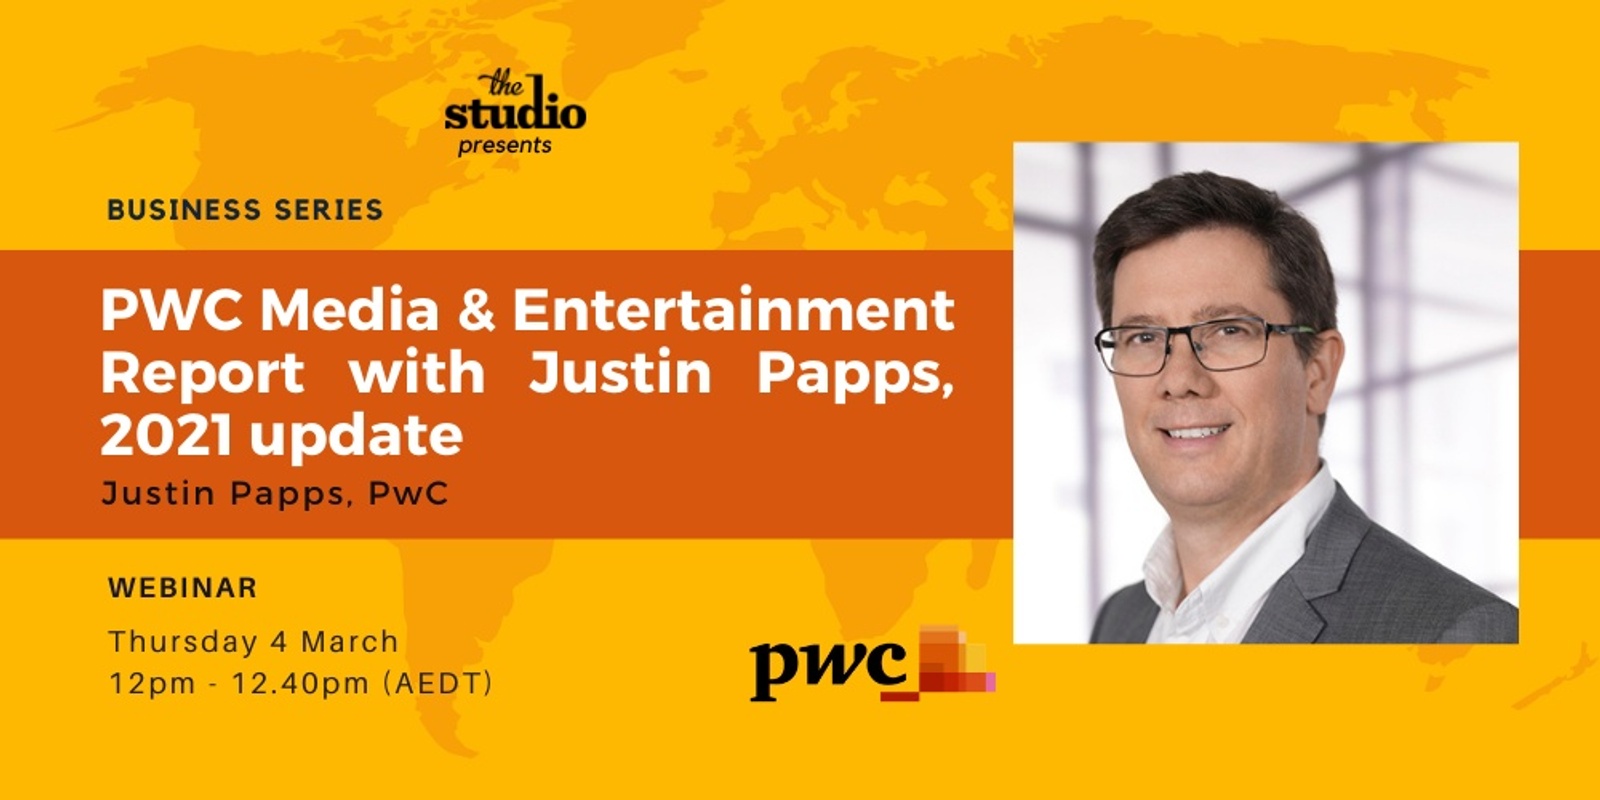 Banner image for PWC Media & Entertainment Report with Justin Papps, 2021 update